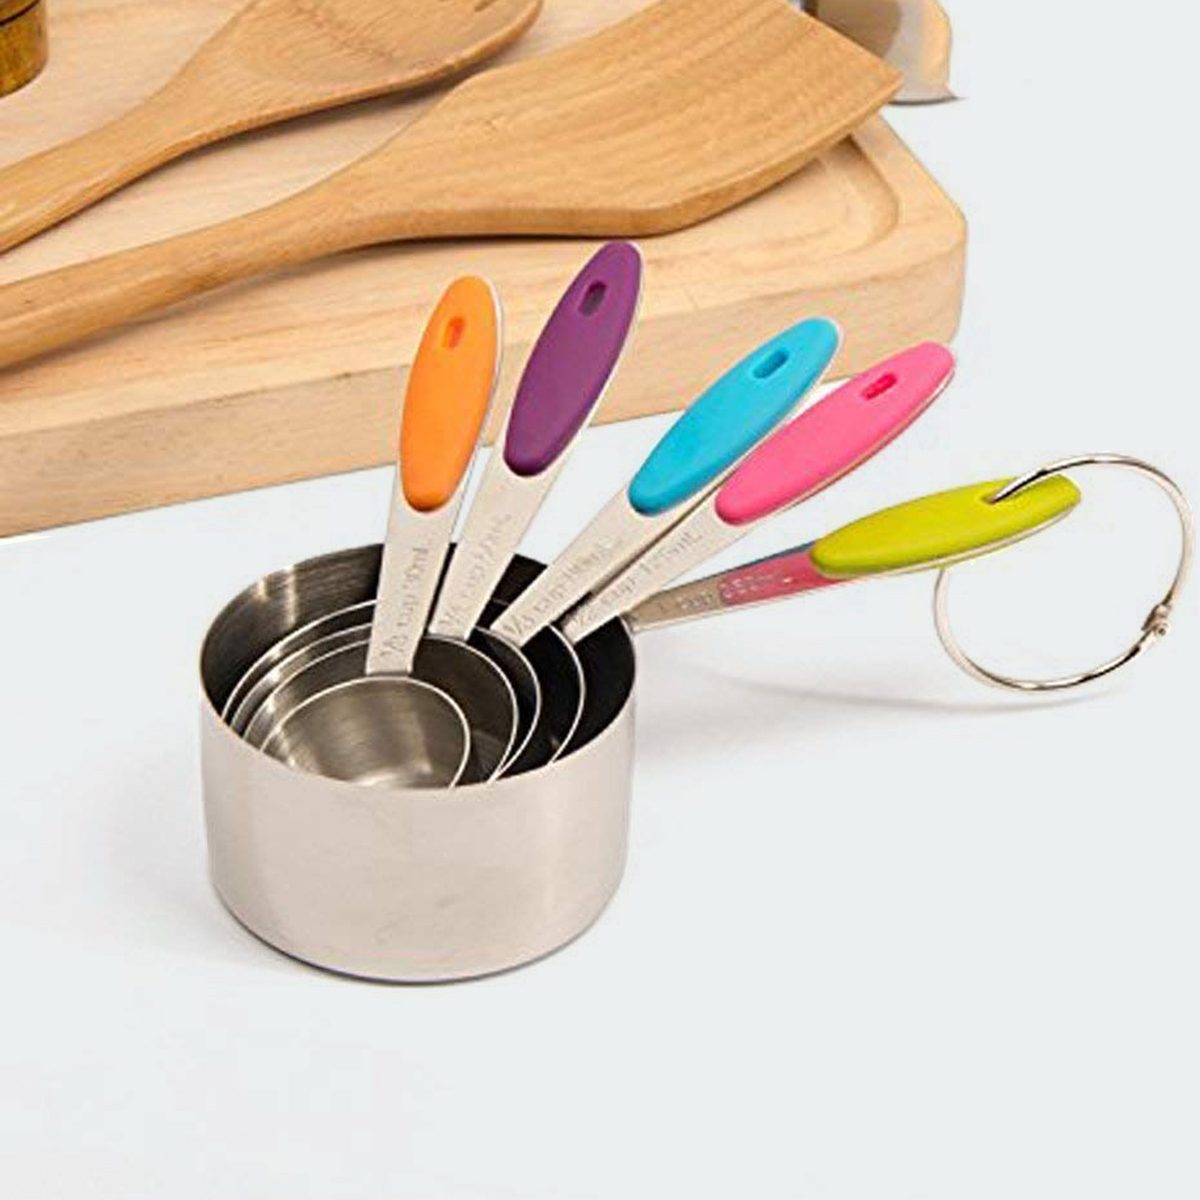 Measuring Cups and Spoons Set: U-Taste 18/8 Stainless Steel 12 Pieces Metal  Stacking Kitchen Baking Cooking Food Measure Set 7 Cups 5 Spoons